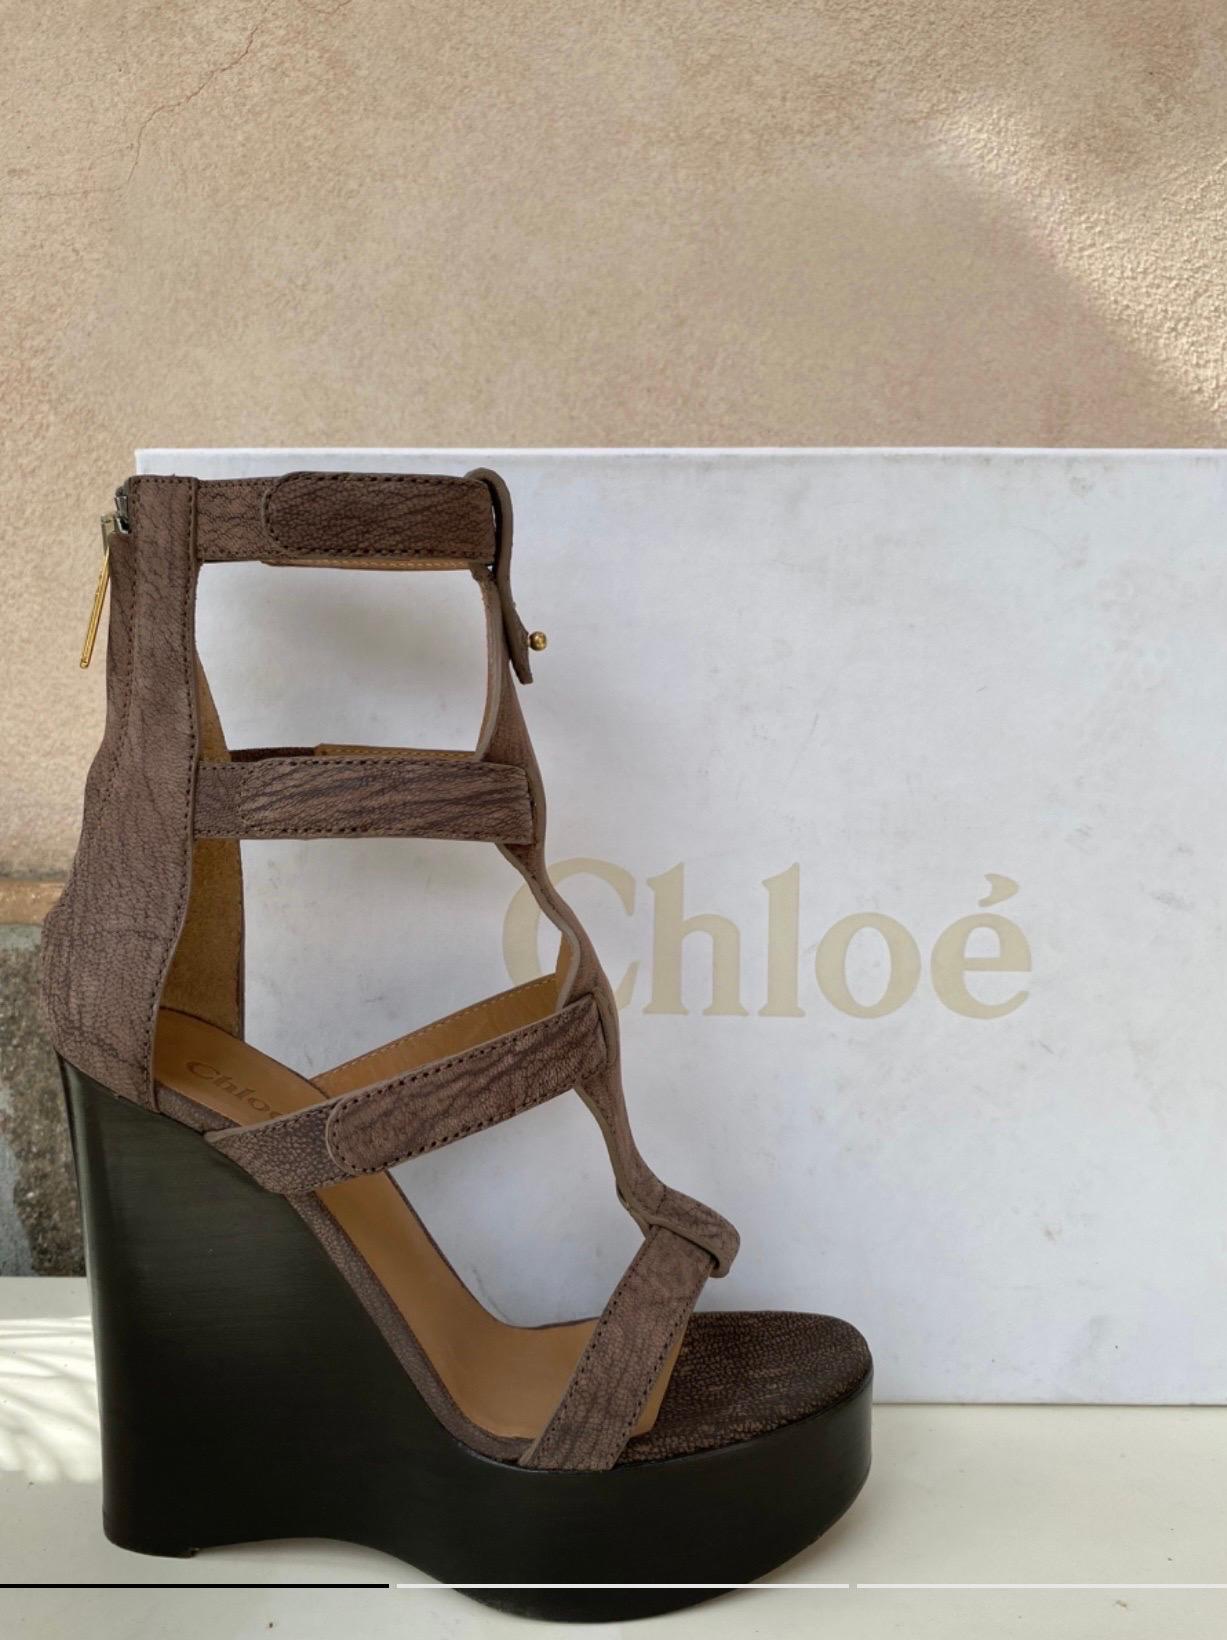 Chloe gladiator sandal, in brown leather with black details, number 39, measurements: heel 13 cm, plateau 4 cm, insole 25 cm, leg height 14 cm, featuring zip closure, complete with dusbag and box. Very good condition.